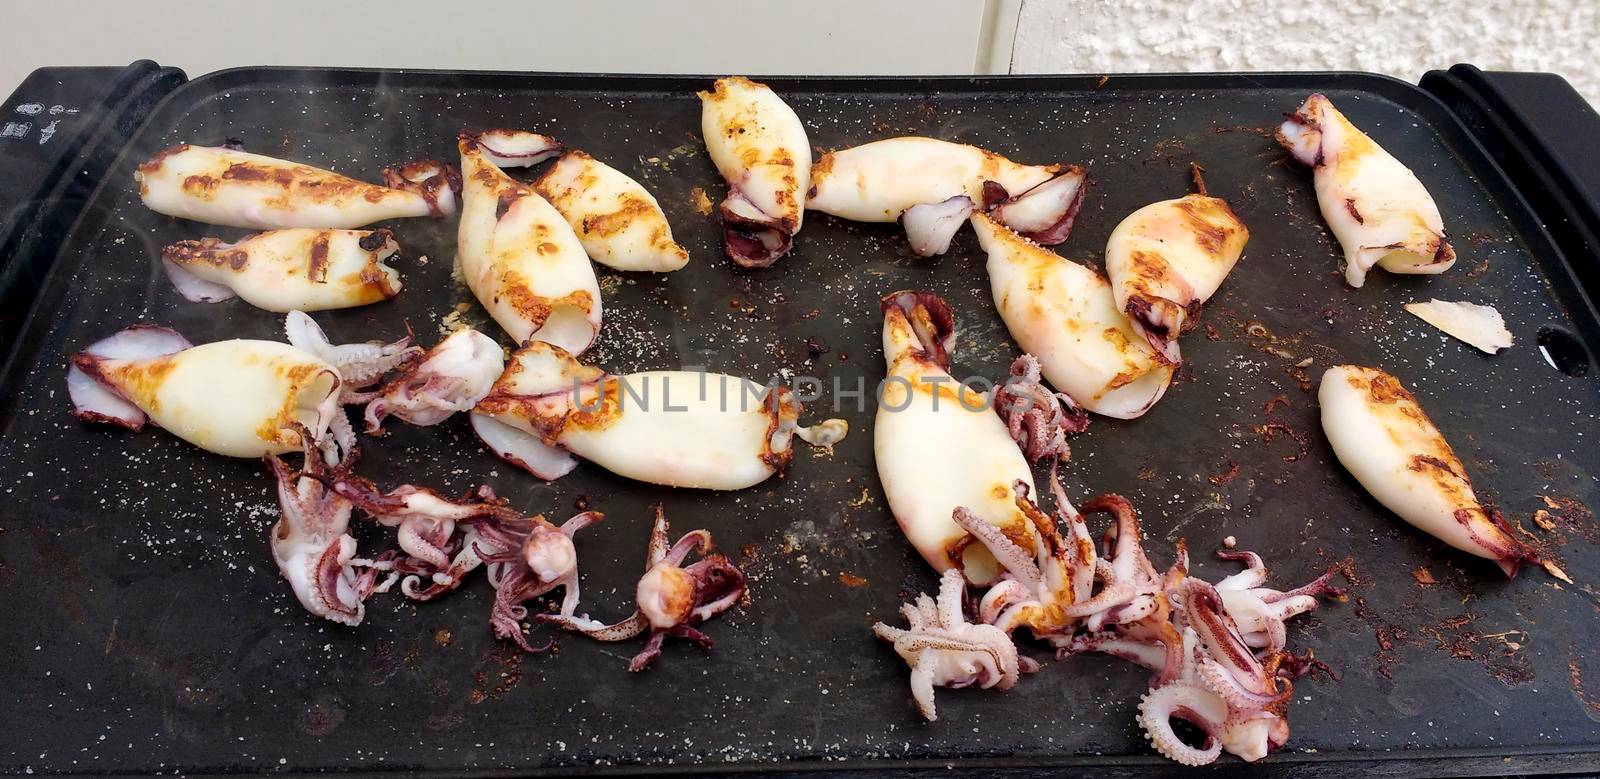 Grilled squids with olive oil, salt and garlic by soniabonet